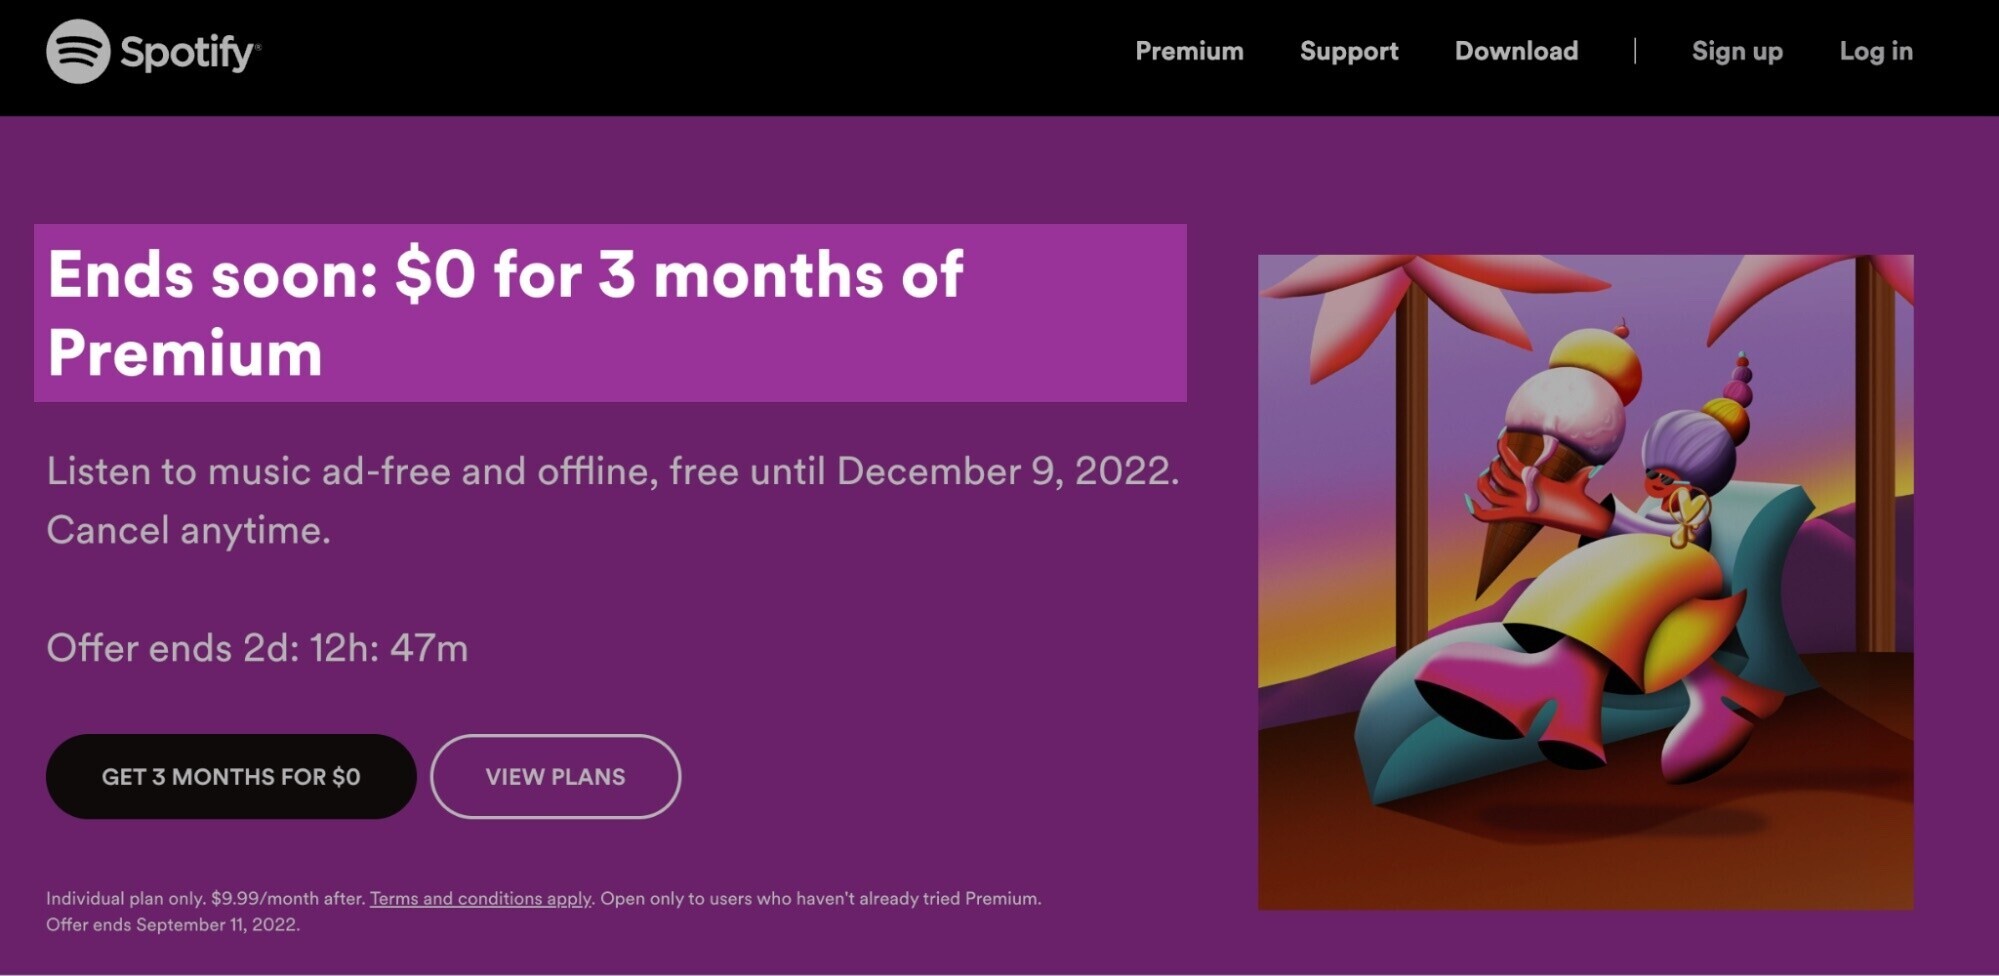 Spotify's landing page with the headline: "Ends soon: $0 for 3 months of Premium"